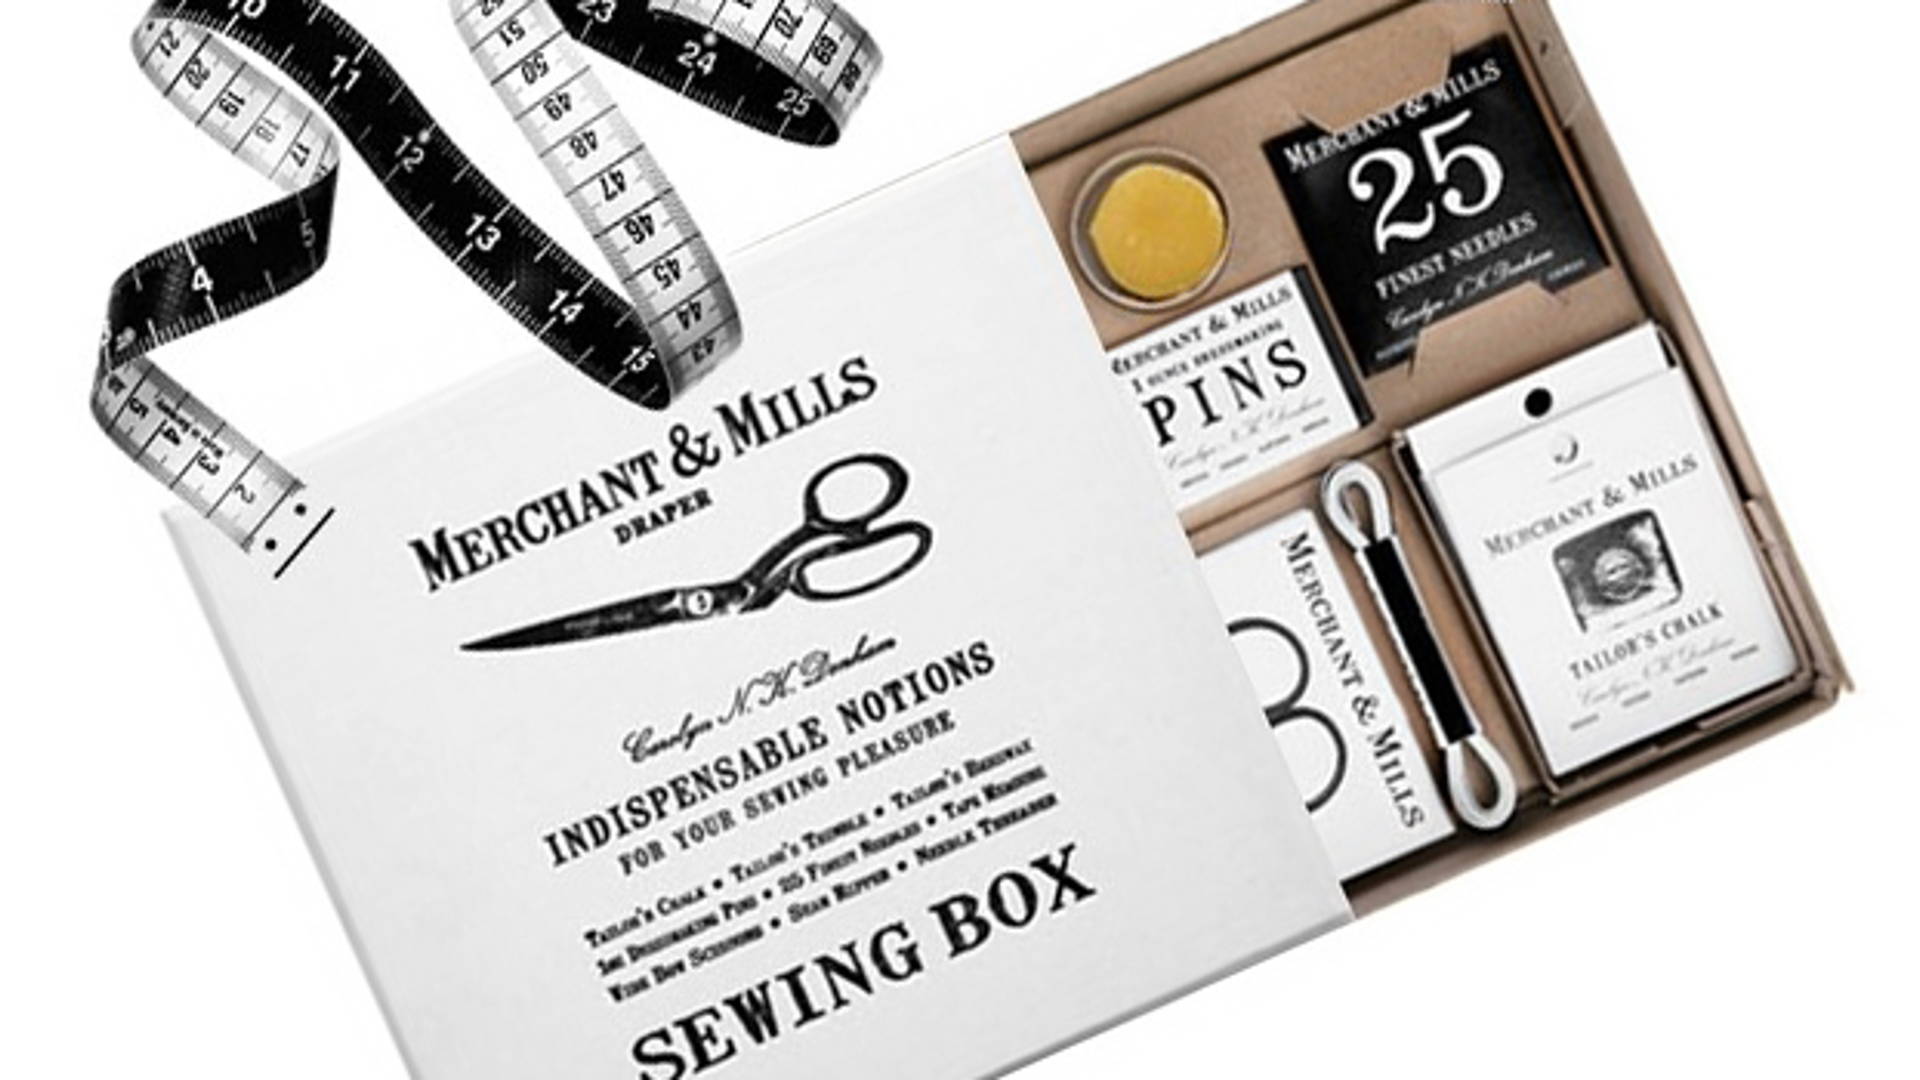 Featured image for Merchant & Mills Draper